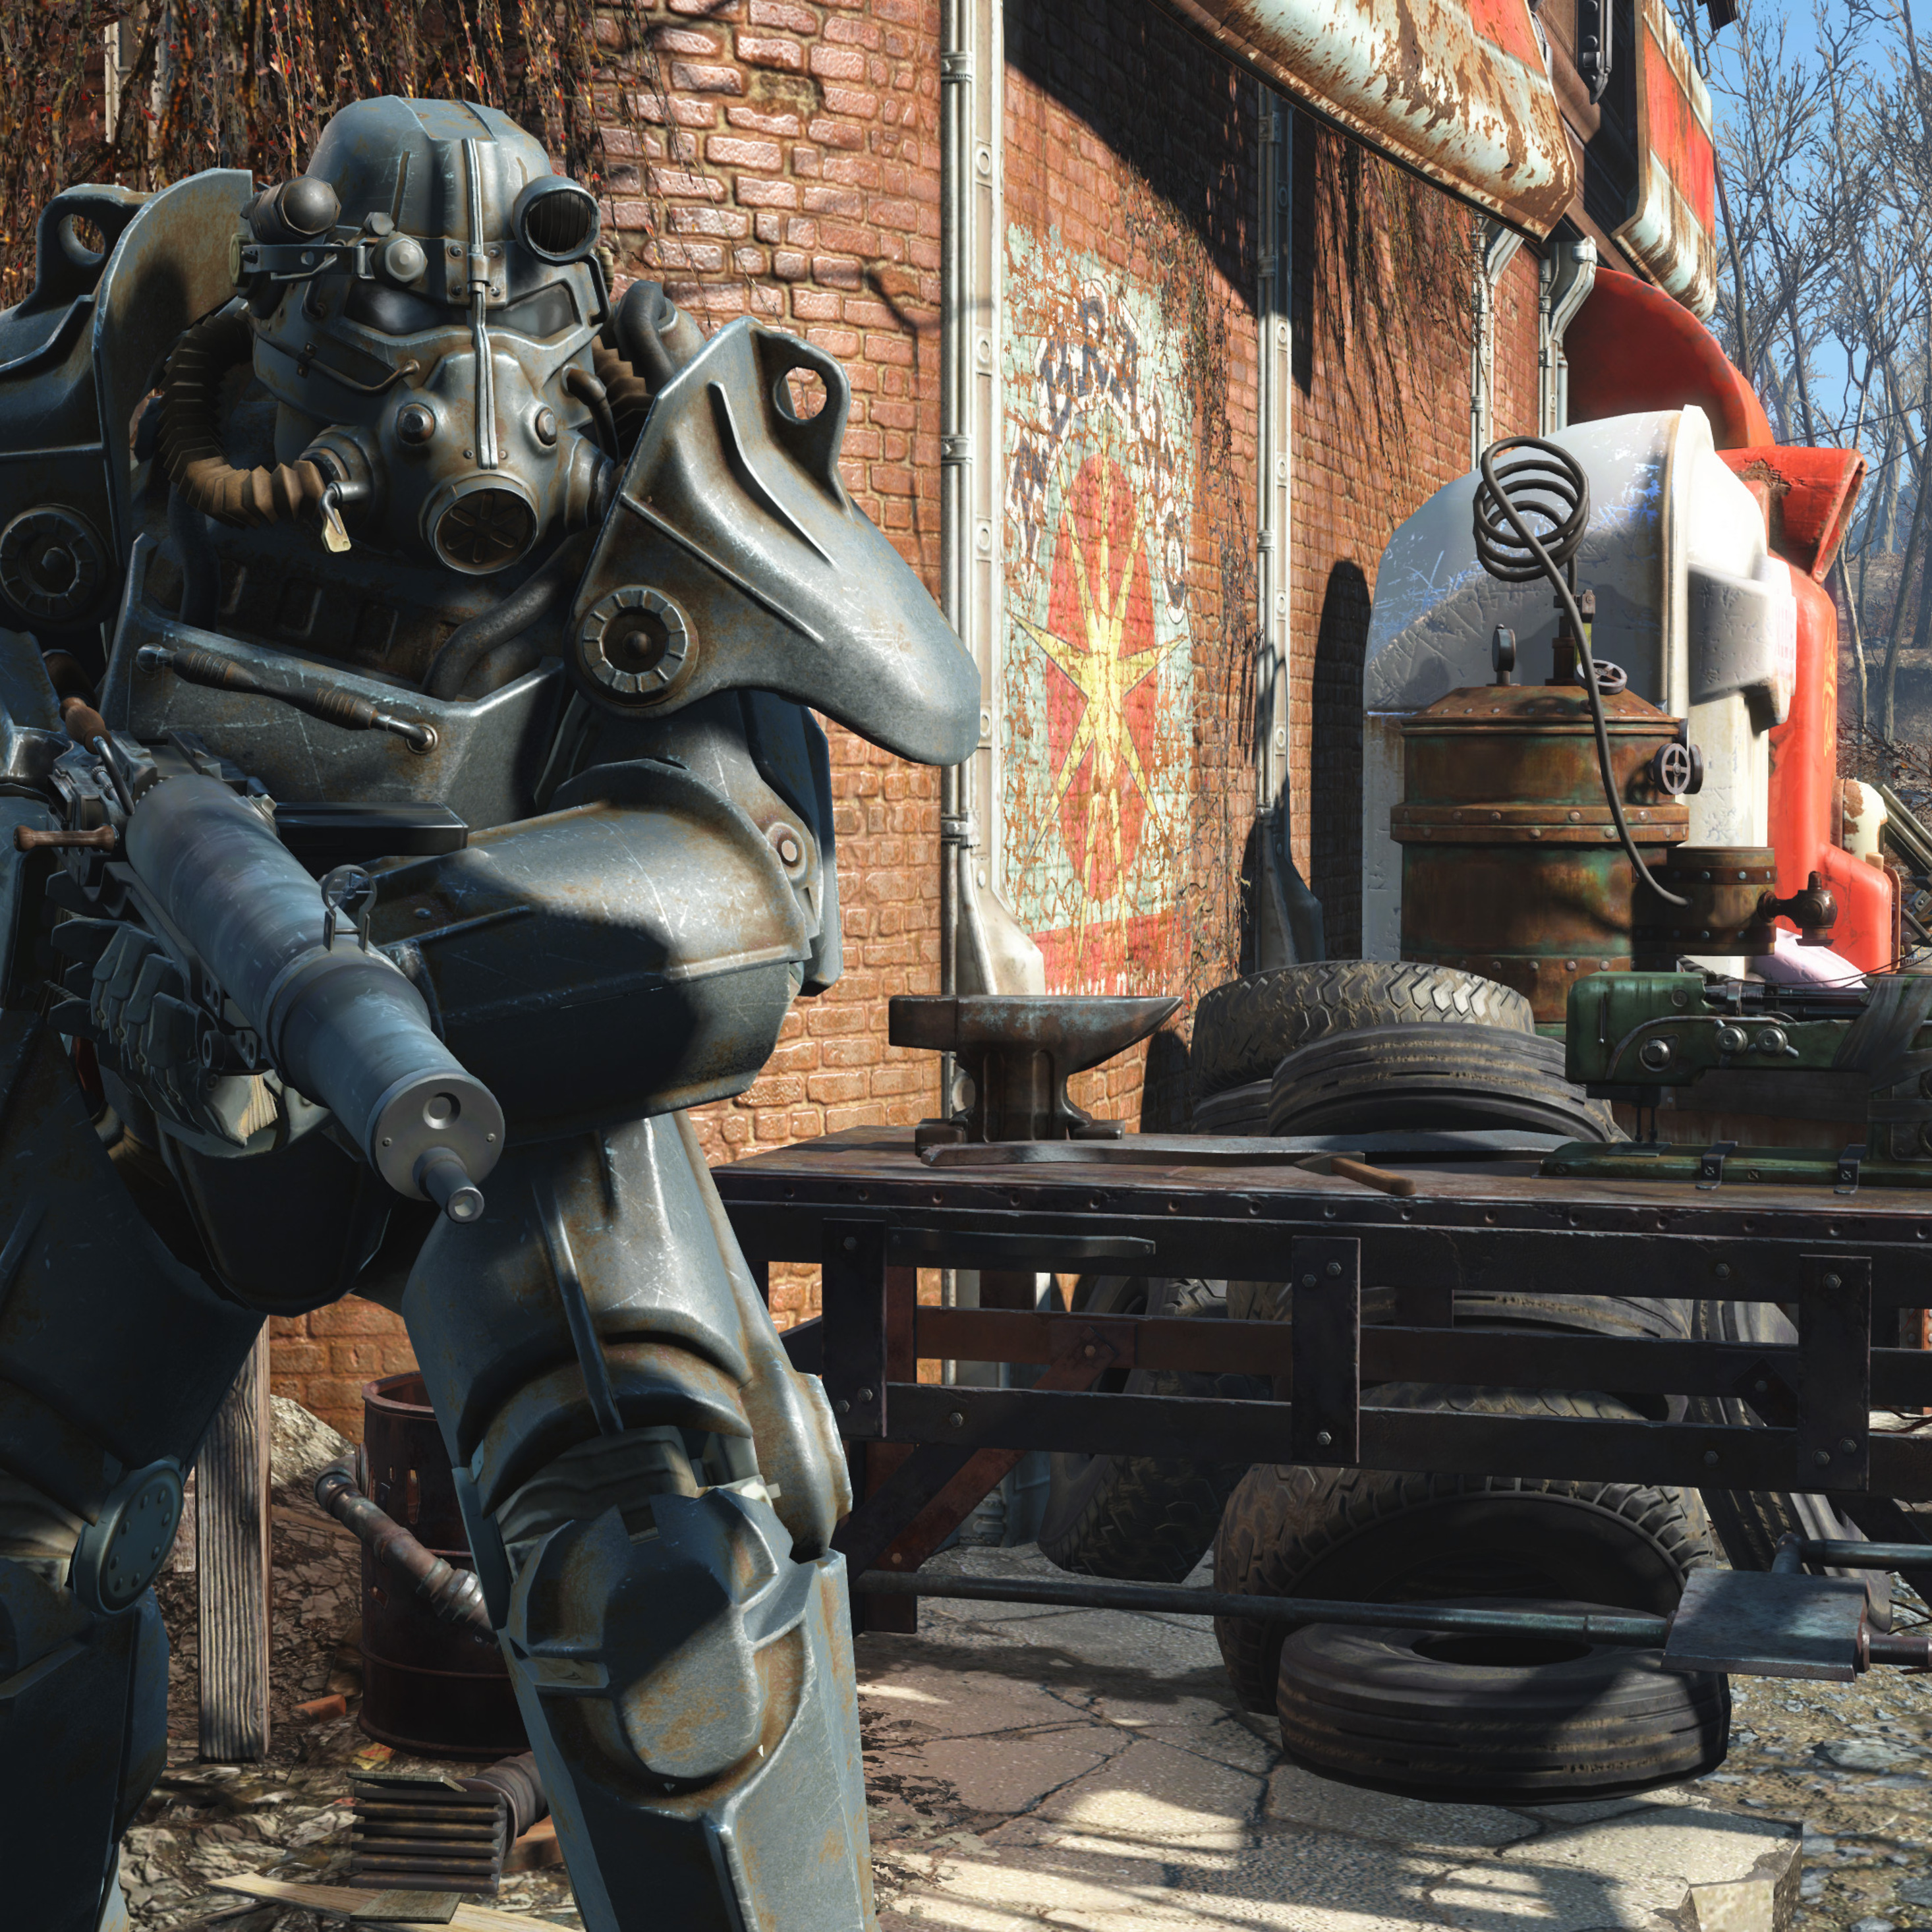 Фоллаут ps4. Фоллаут 4 фото. Fallout 4: game of the year Edition. Пазл фоллаут. Reklama in Fallout 4.